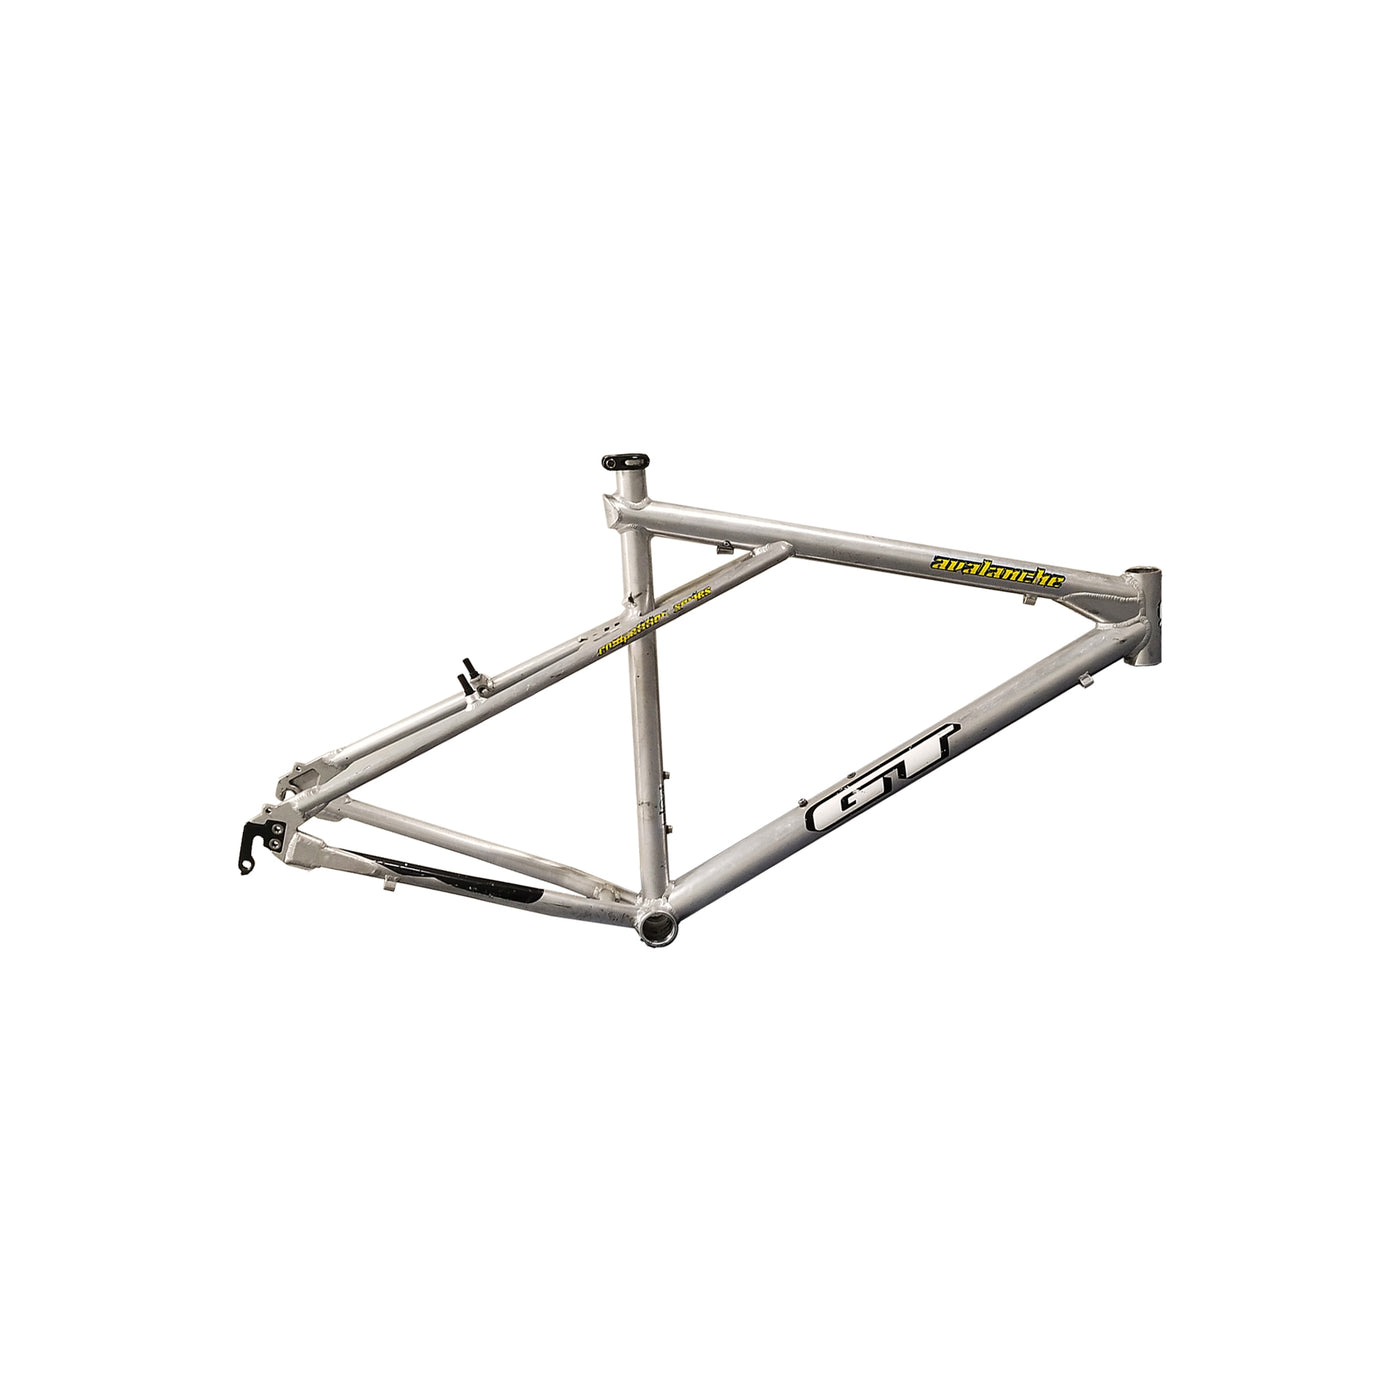 1999 Gt Avalanche LE Bike Frame | Size 20in